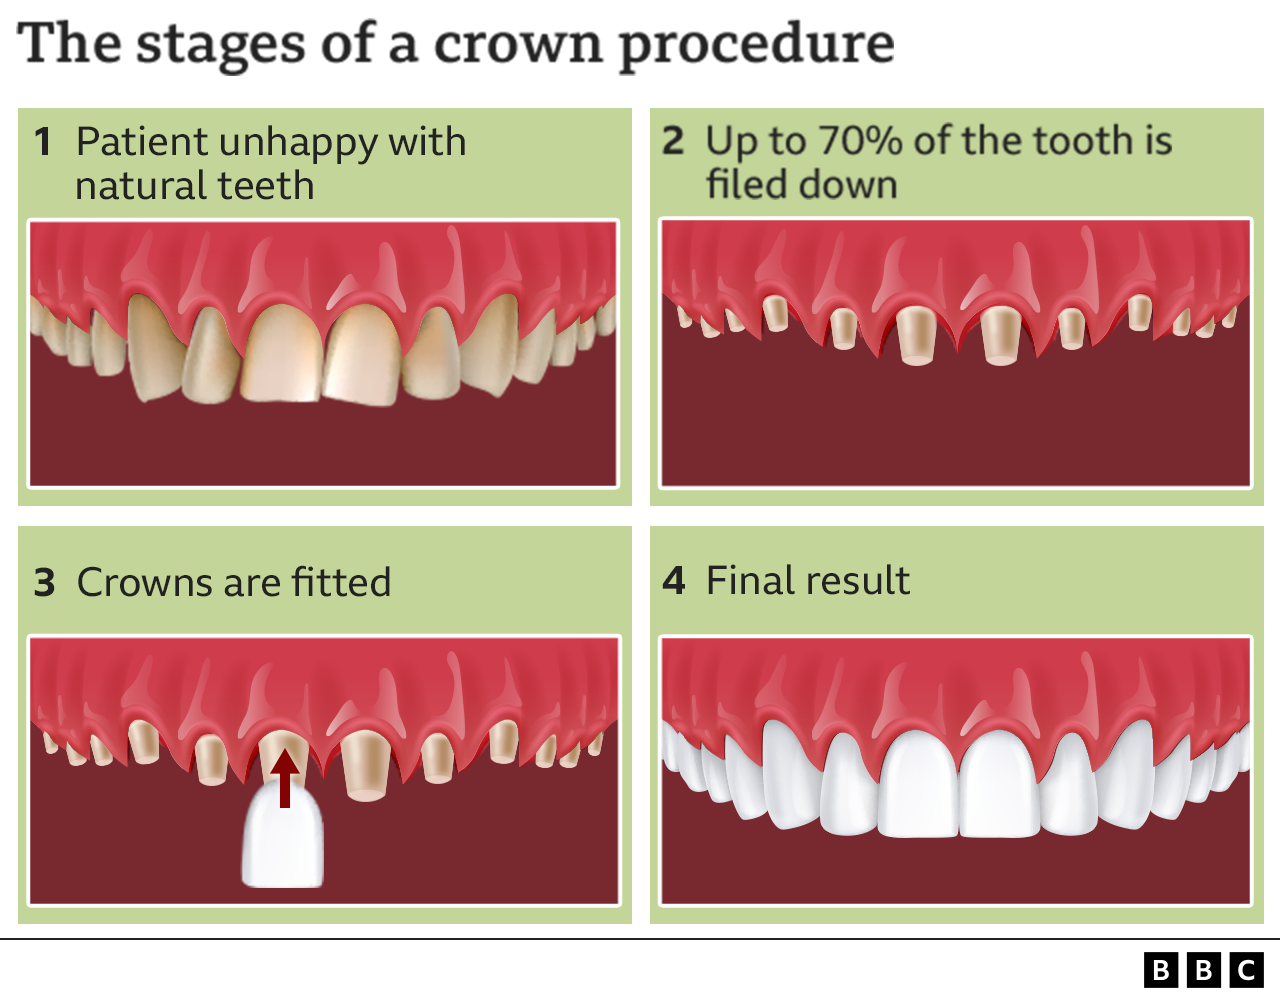 The stages of a crown procedure - 1 Patient unhappy with natural teeth; 2 Up to 70% of the tooth is filed down; 3 Crowns are fitted; 4 Final result